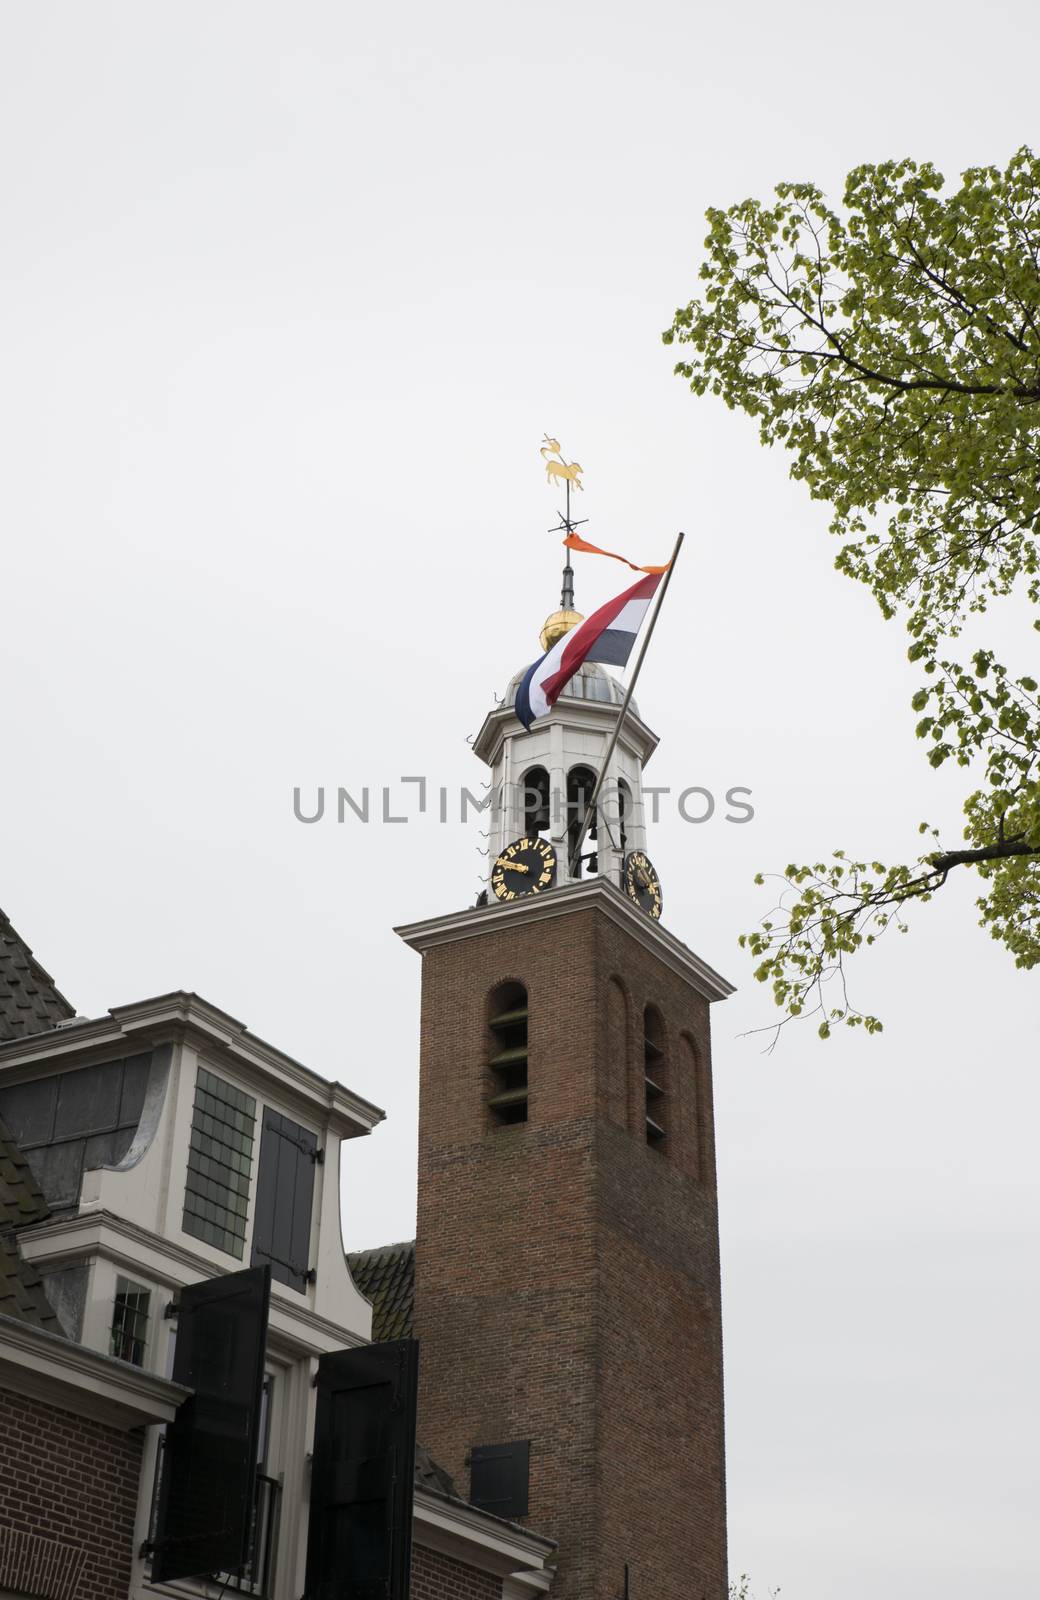 Dutch flag with orange streamer on the church of Hellevoetlsuis in the Netherlands, the orange streamer is only used when there is a celebration of the royal family